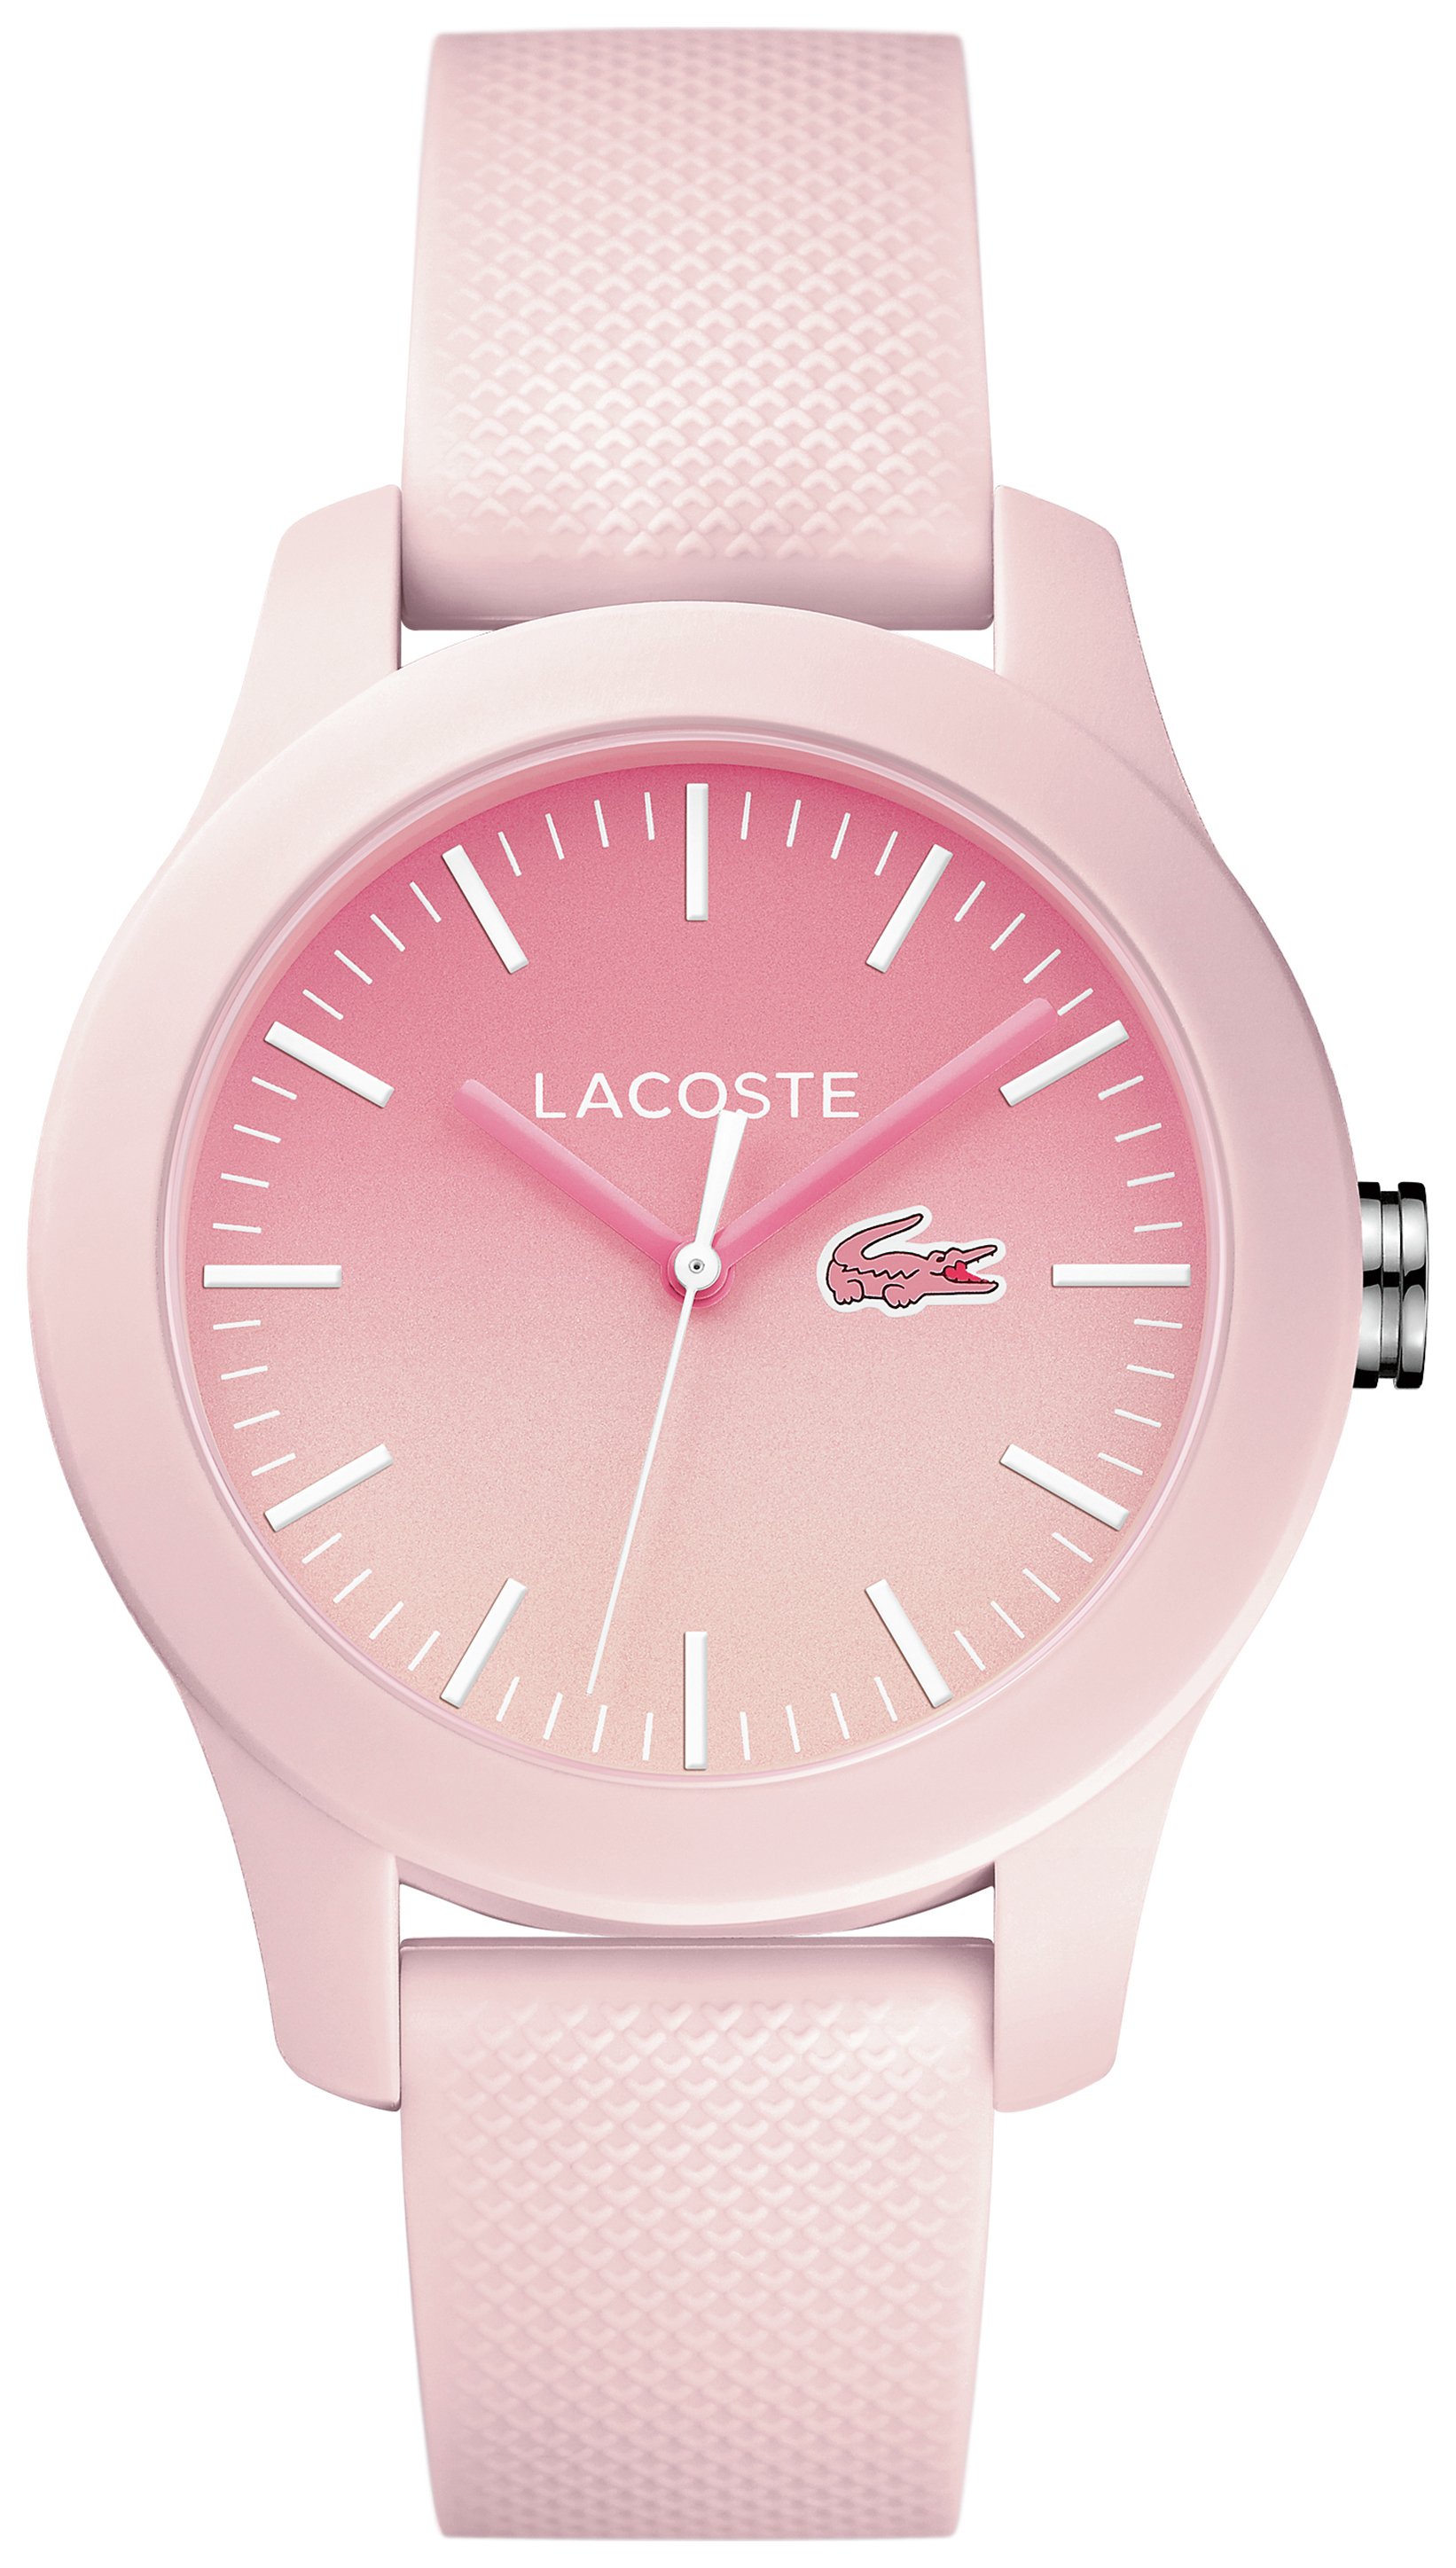 lacoste watches at argos